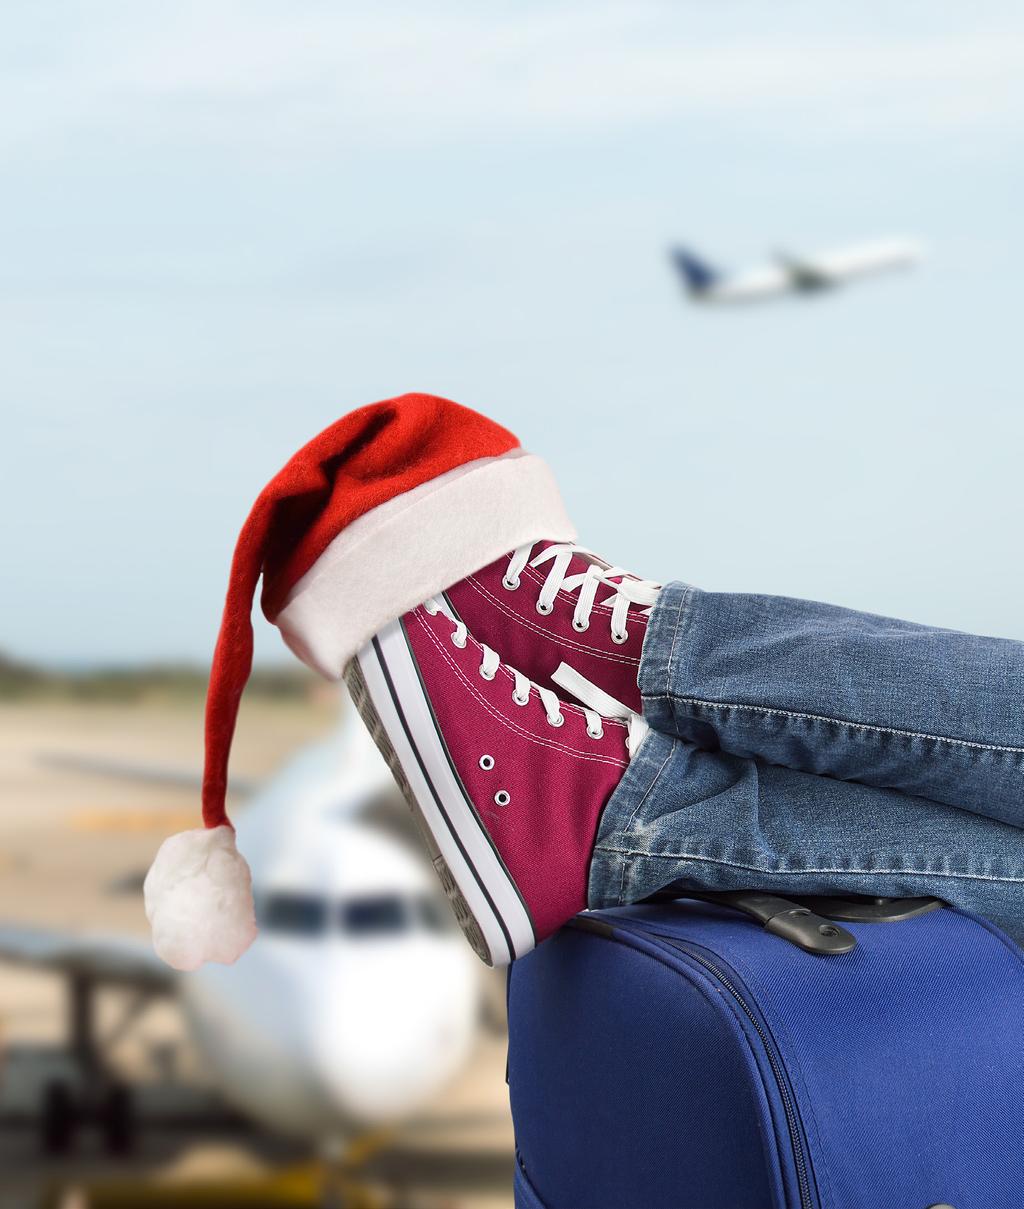 NOT BEING HOME FOR CHRISTMAS Holiday travel costs can add up quickly, especially if you re booking flights that leave on Christmas Eve or Christmas Day.